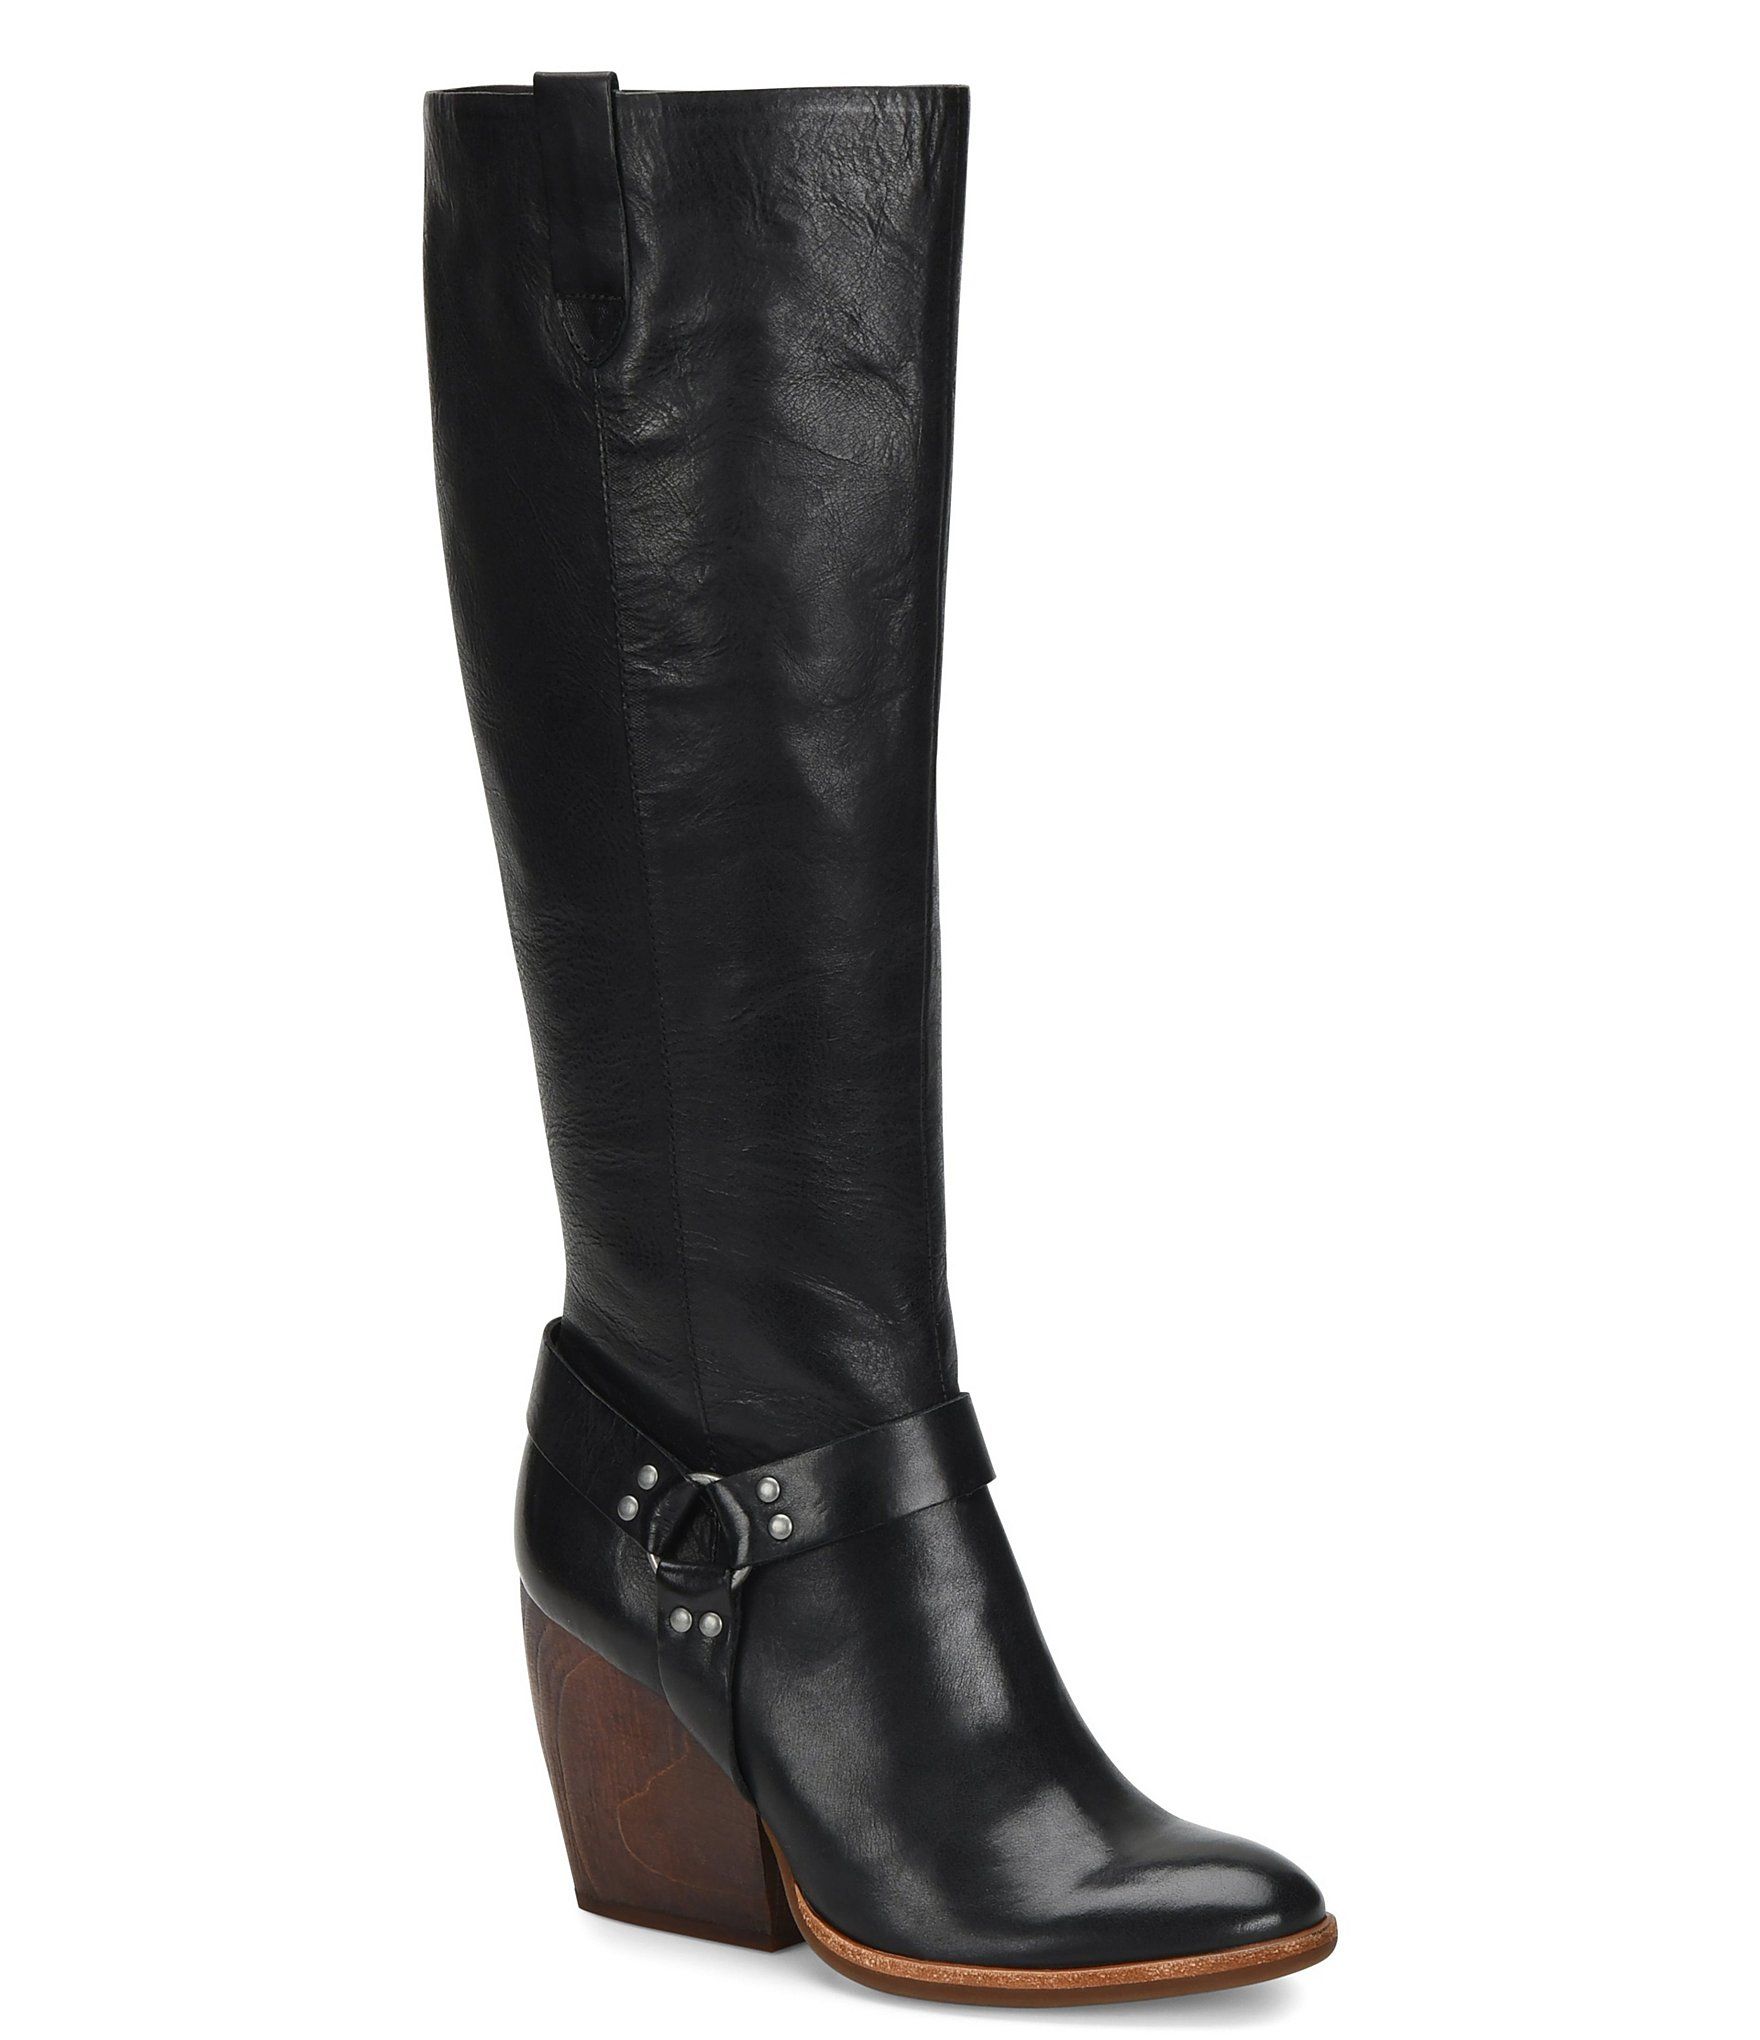 Kork-Ease Lett Tall Leather Block Heel Harness Boots – Luggage 7.5M